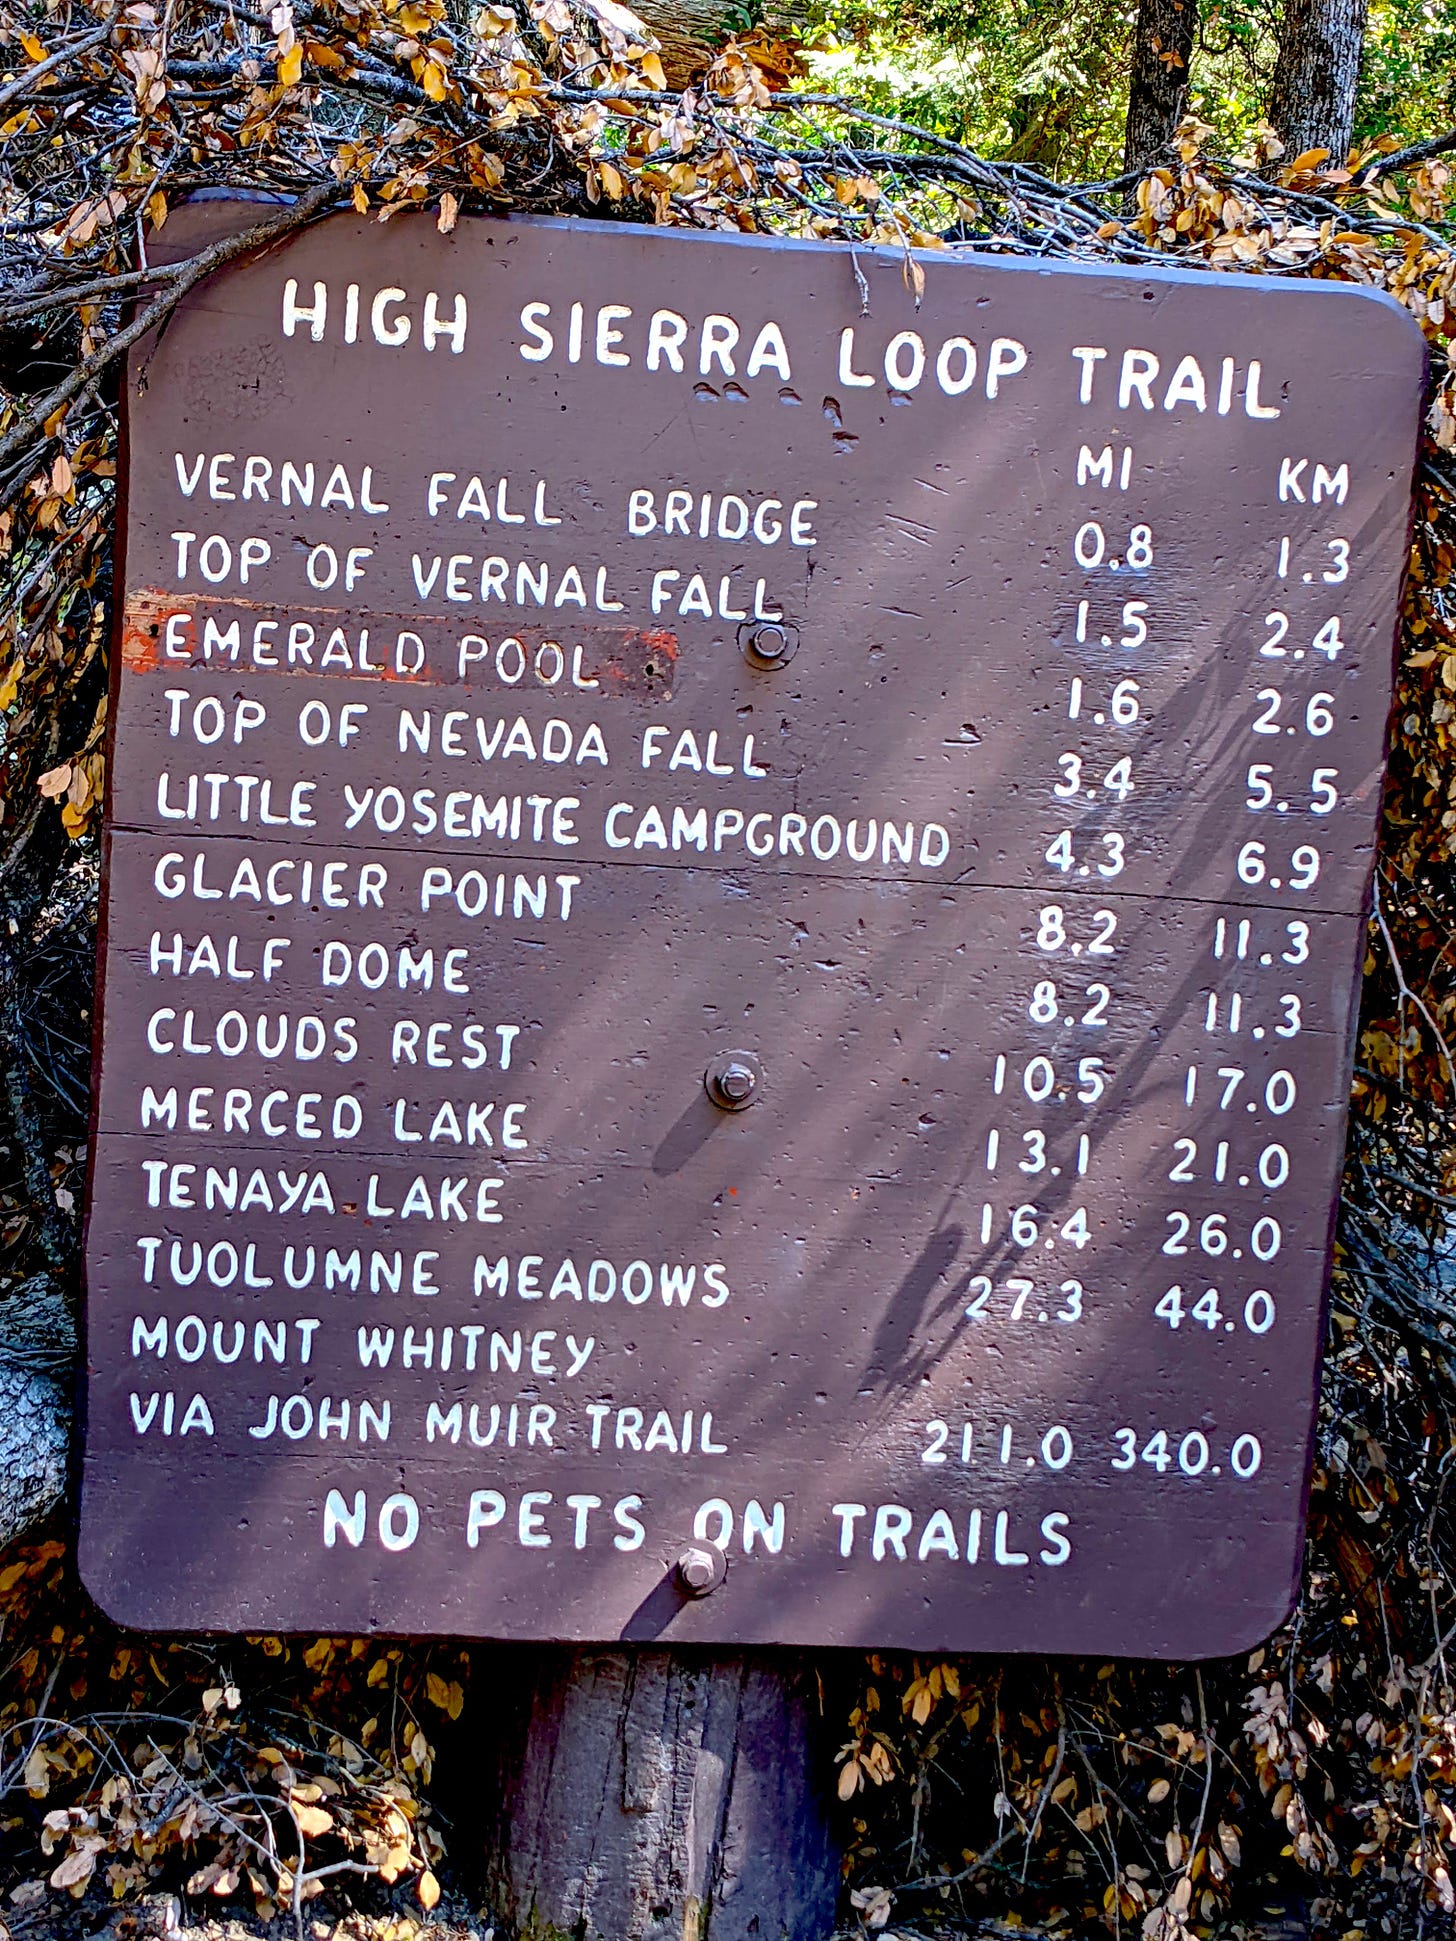 Trailhead sign listing the distances of the trails that are part of the High Sierra Loop Trail network.